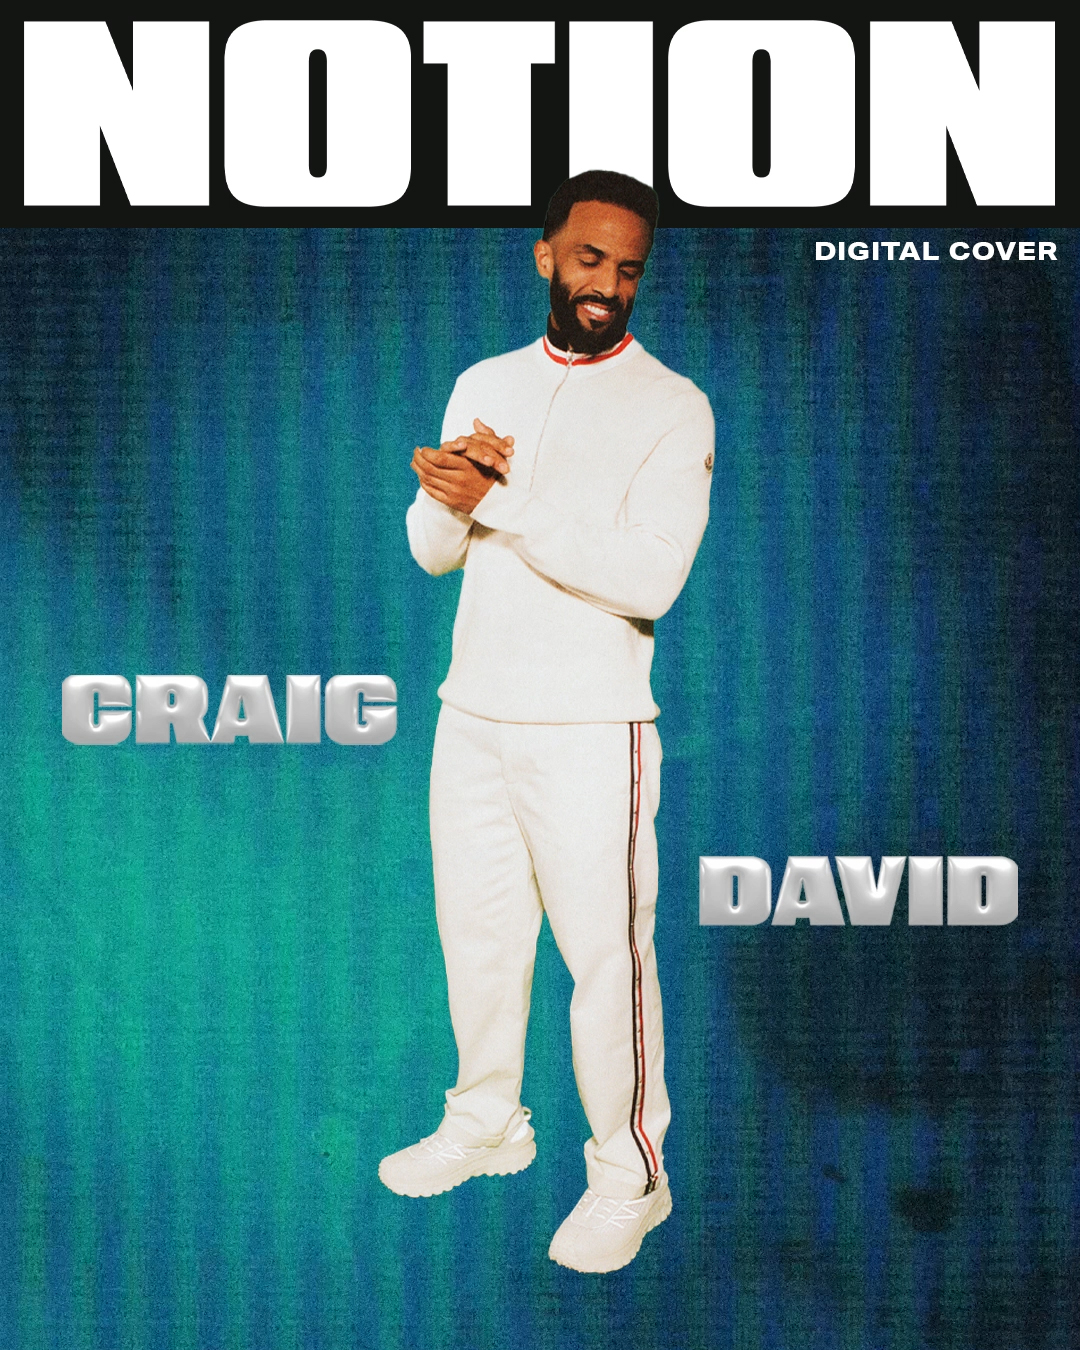 Digital Cover: Craig David’s ‘22’ Years in the Making